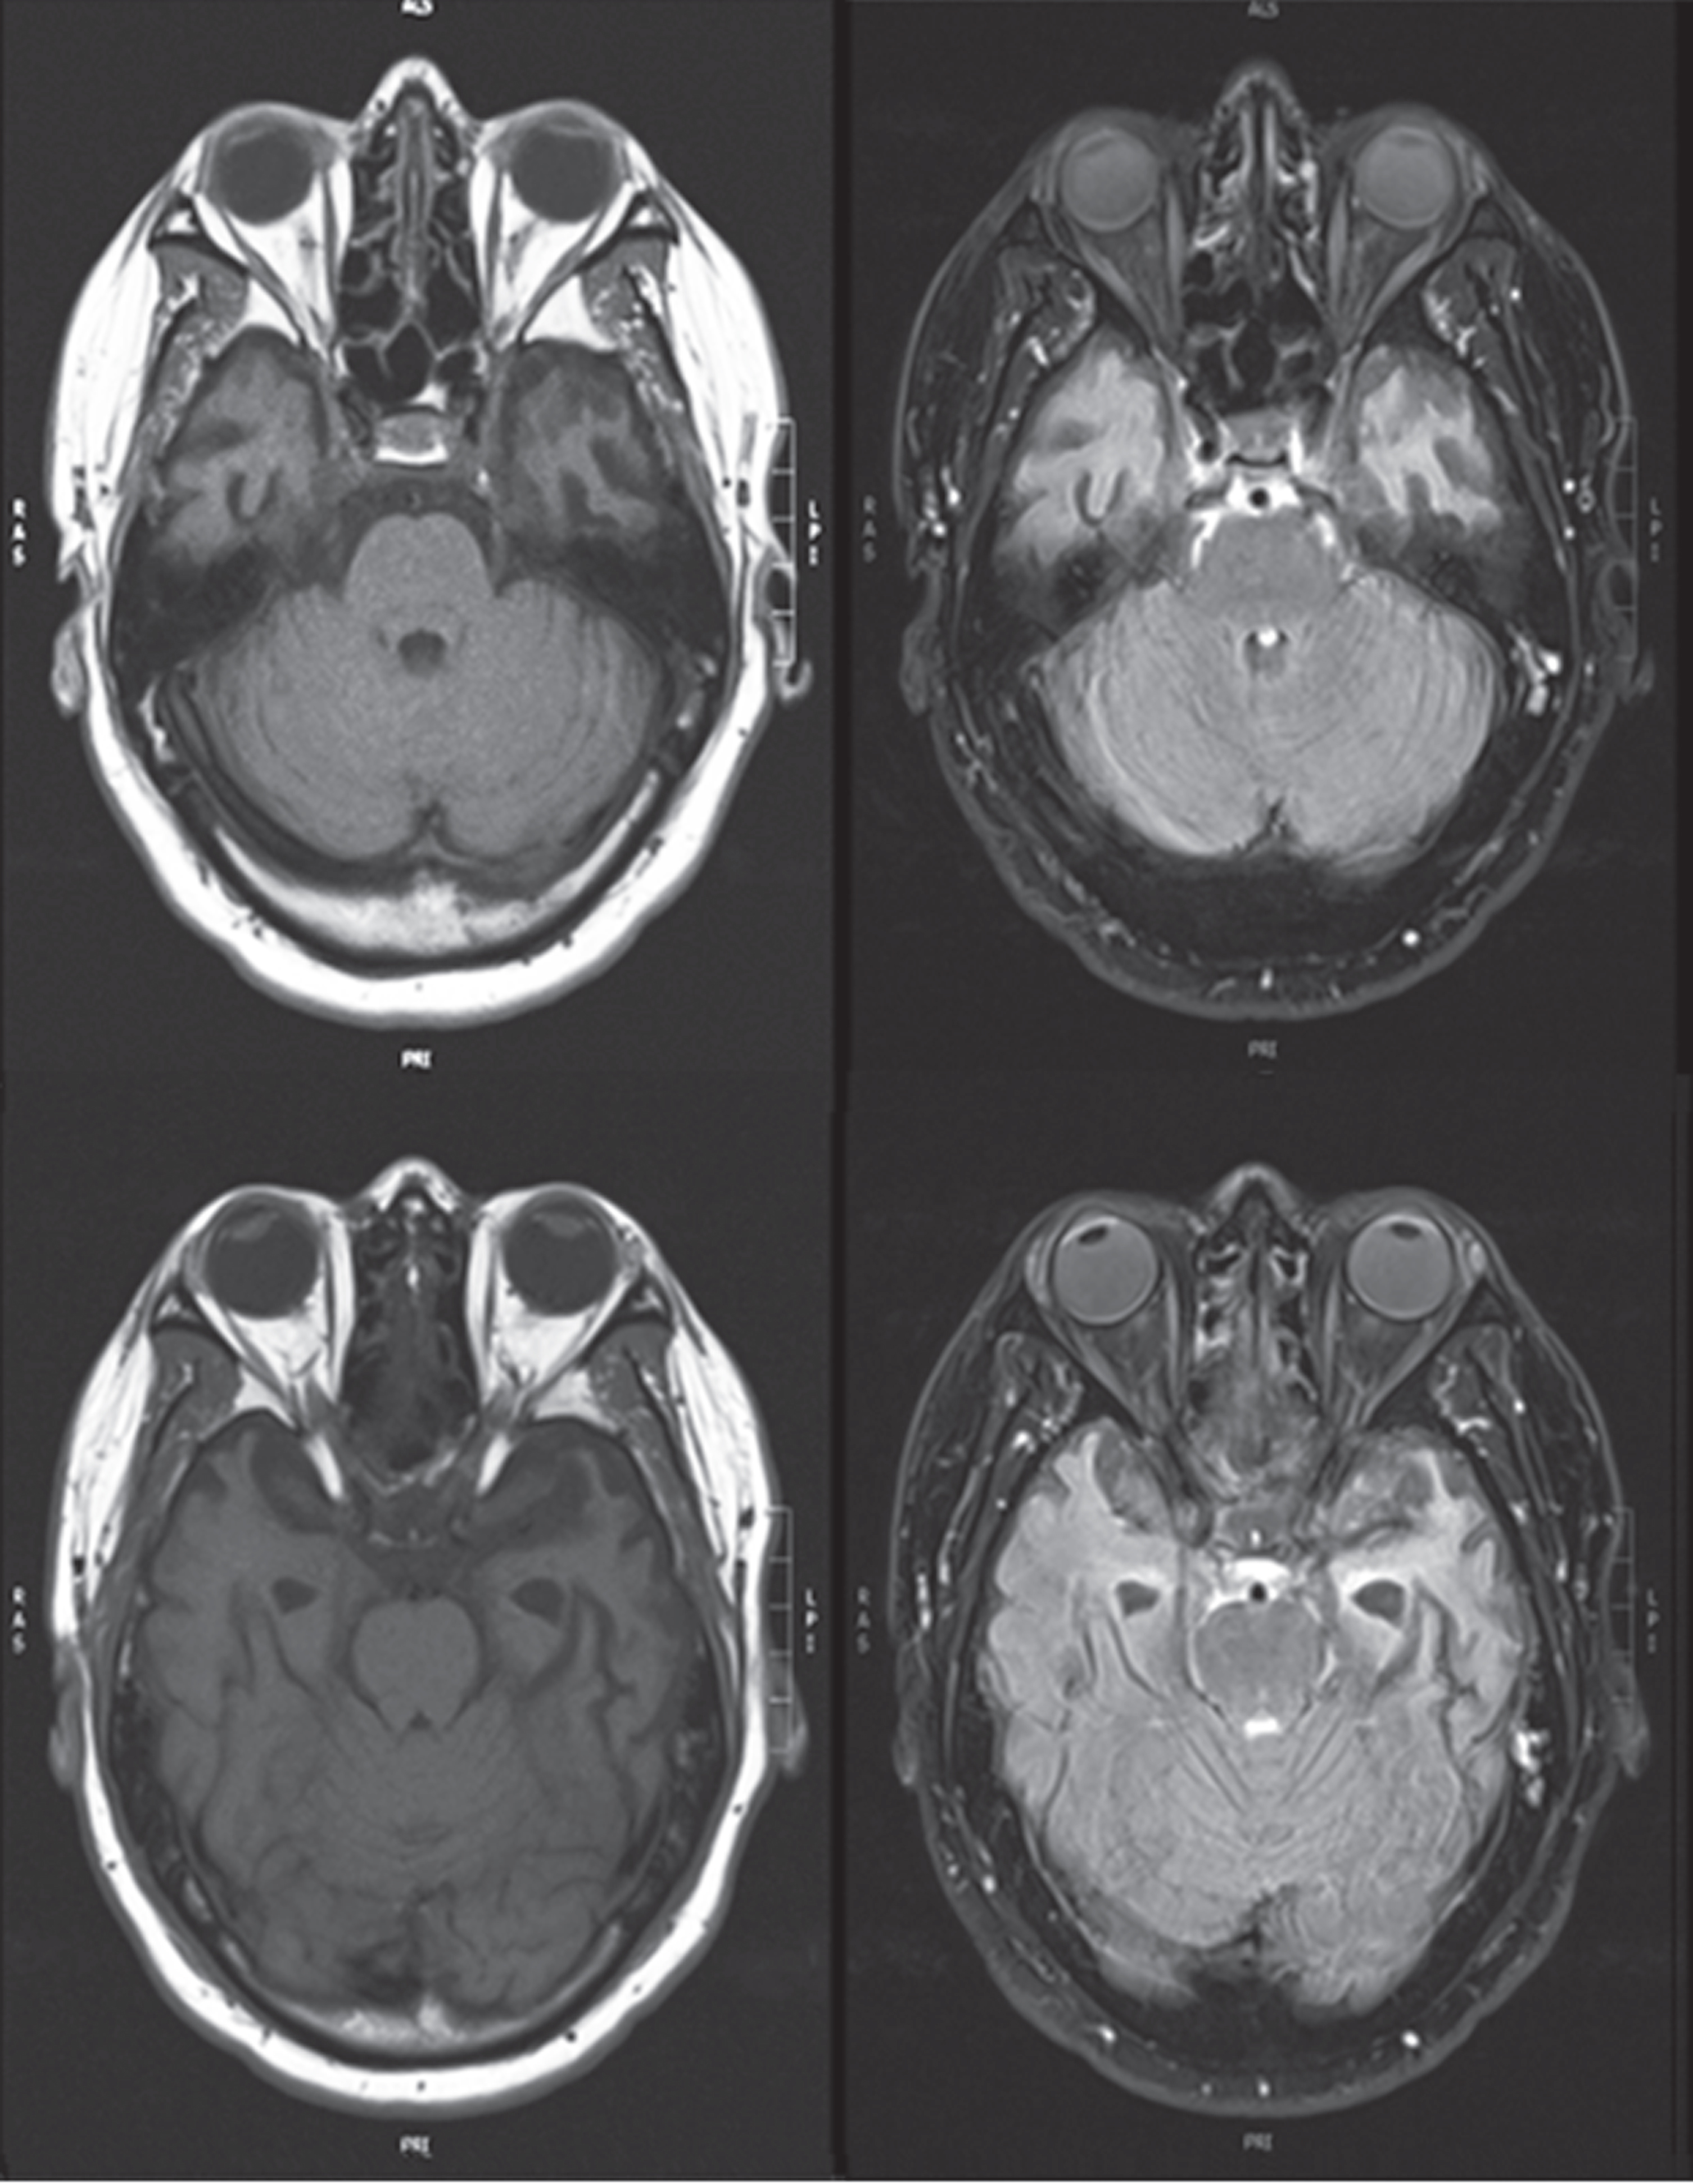 Magnetic resonance imaging (T1-weighted axial images on left and corresponding FLAIR images on right) showing anterior temporal atrophy involving temporal poles, more prominently on the left. Informed consent for images obtained.